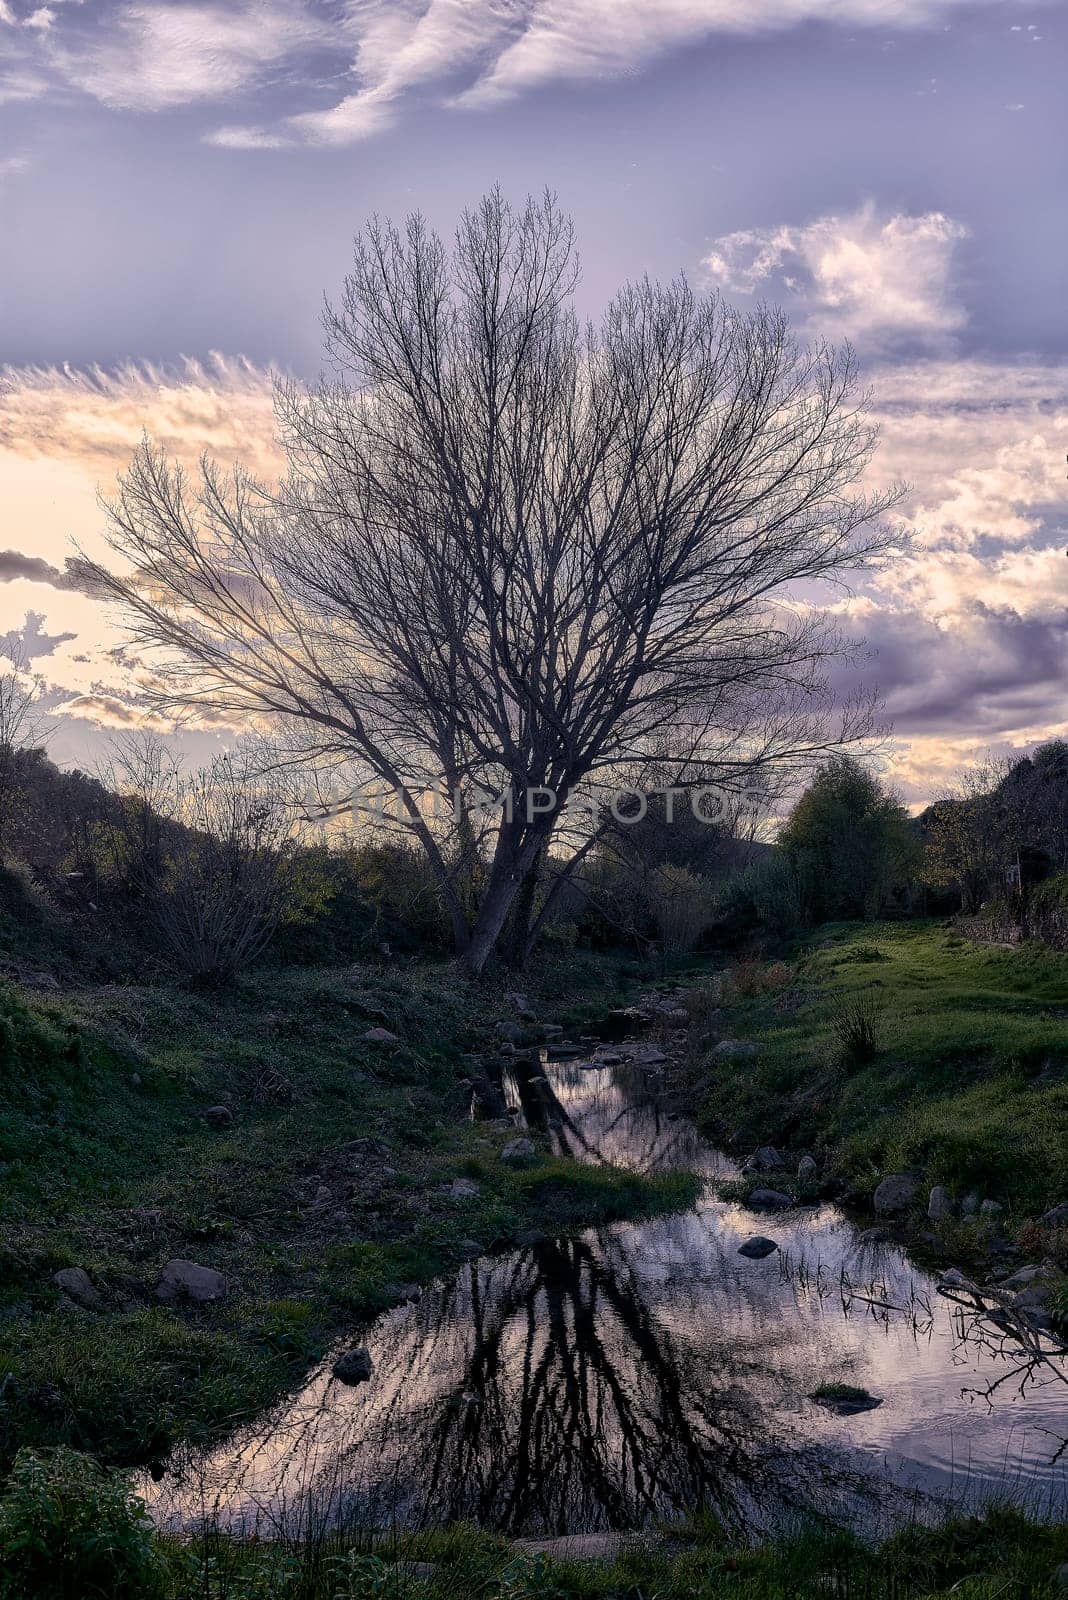 A large poplar tree in winter reflected in the river by raul_ruiz